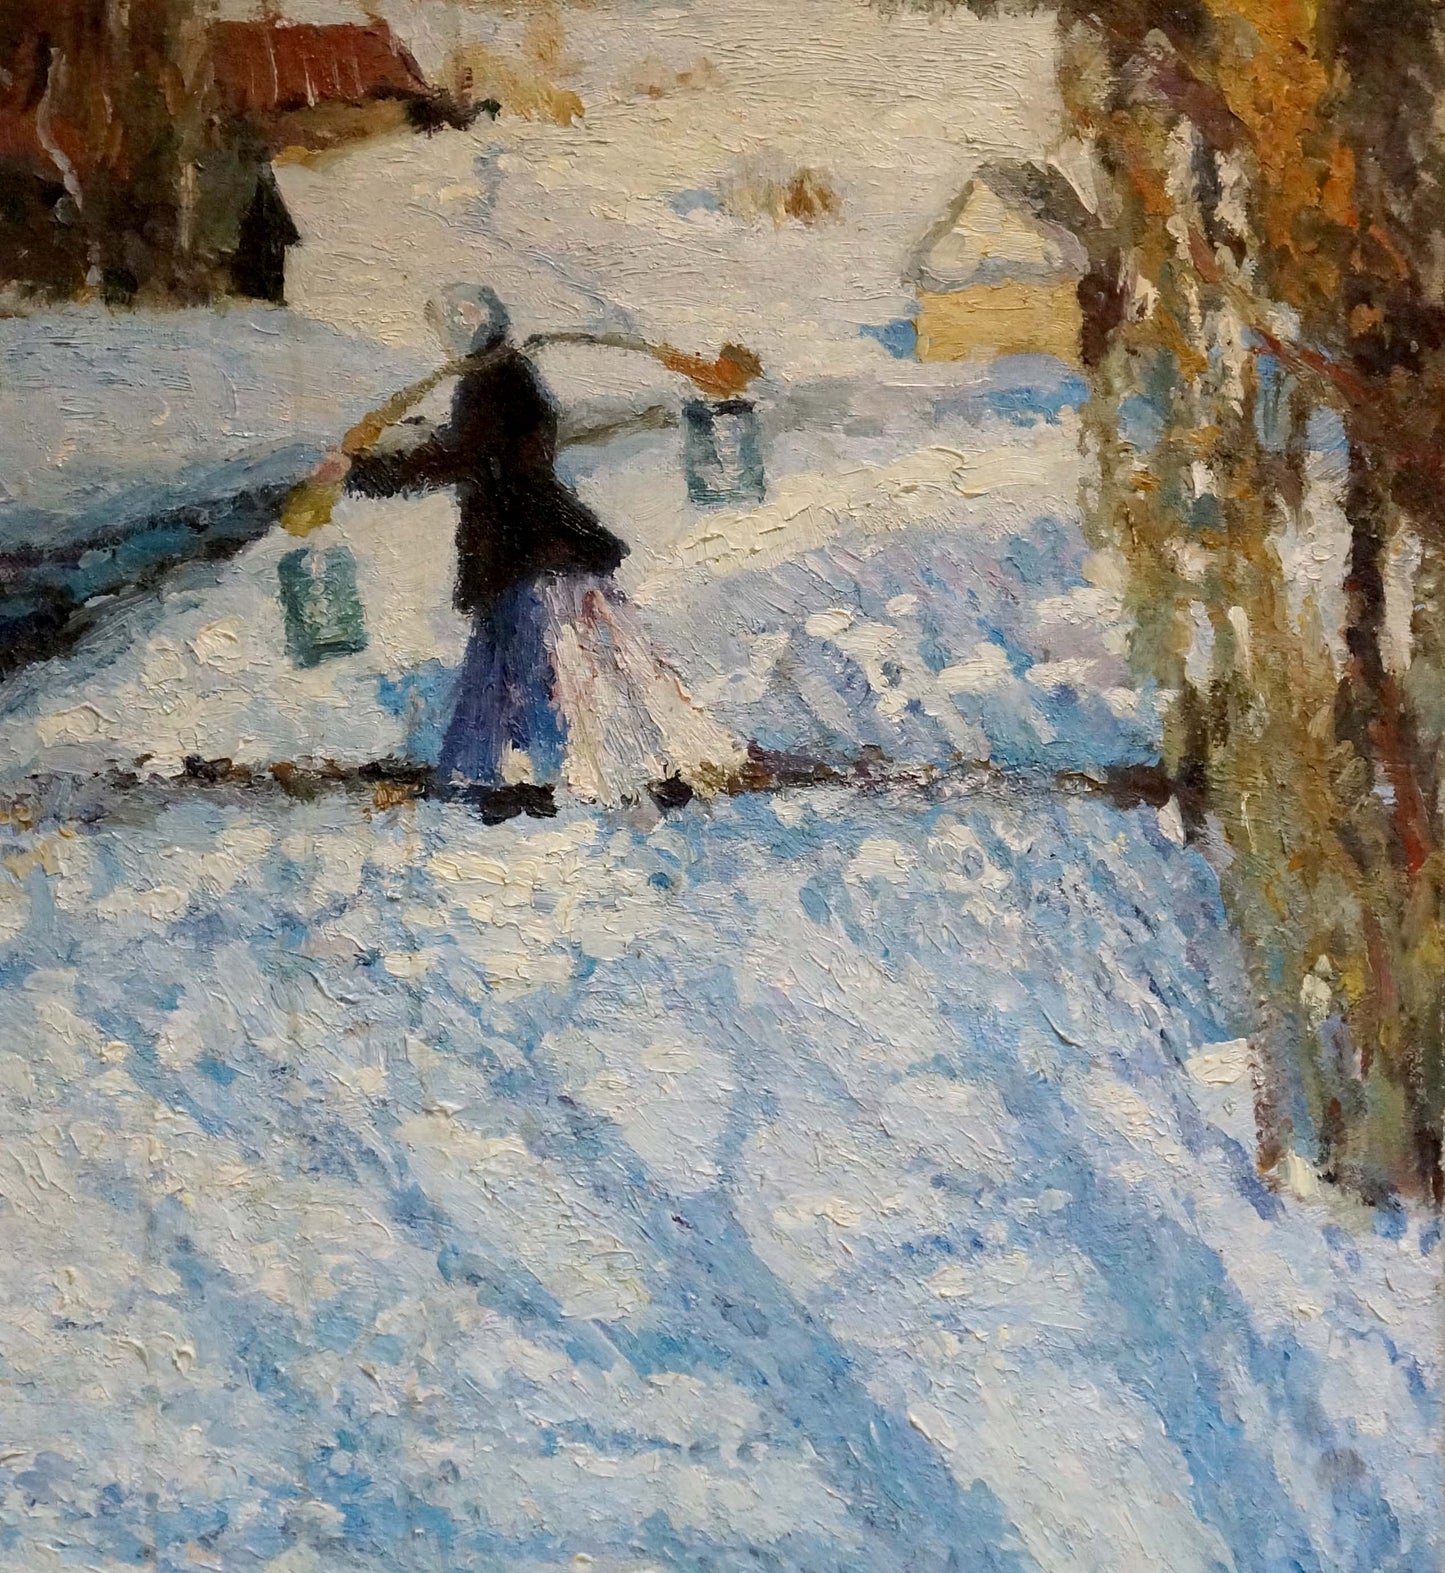 Unknown artist's oil painting of a girl walking to a well in winter